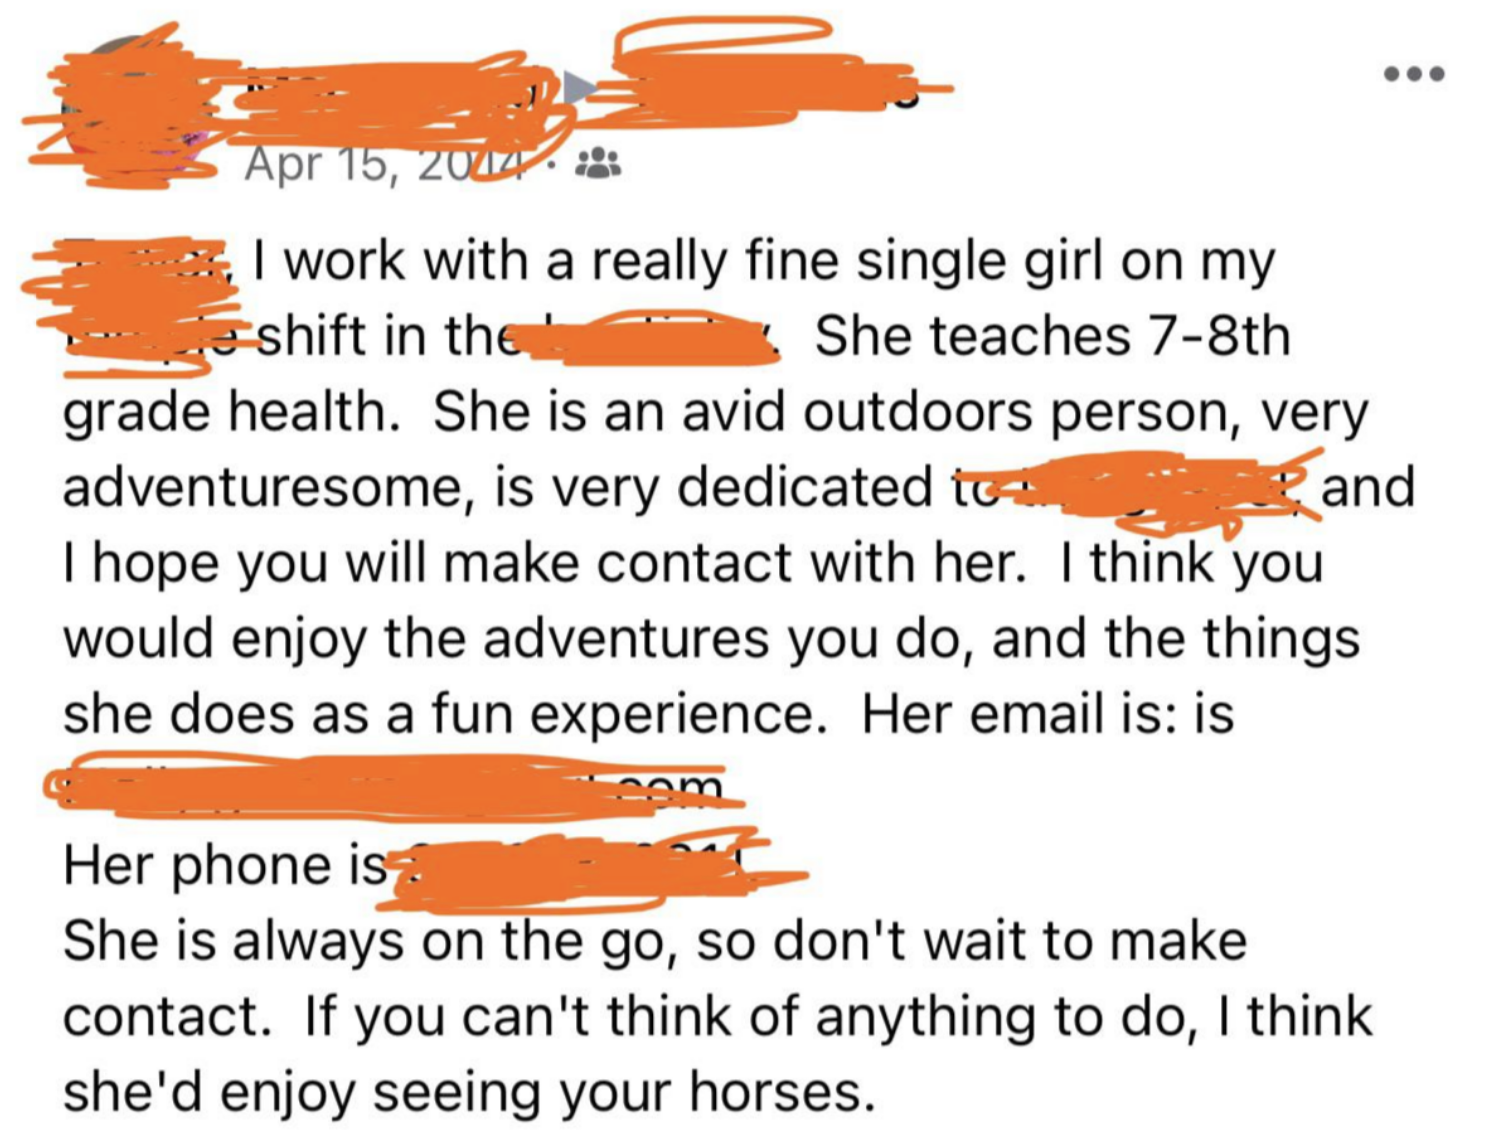 &quot;She is always on teh go, so don&#x27;t wait to make contact.&quot;